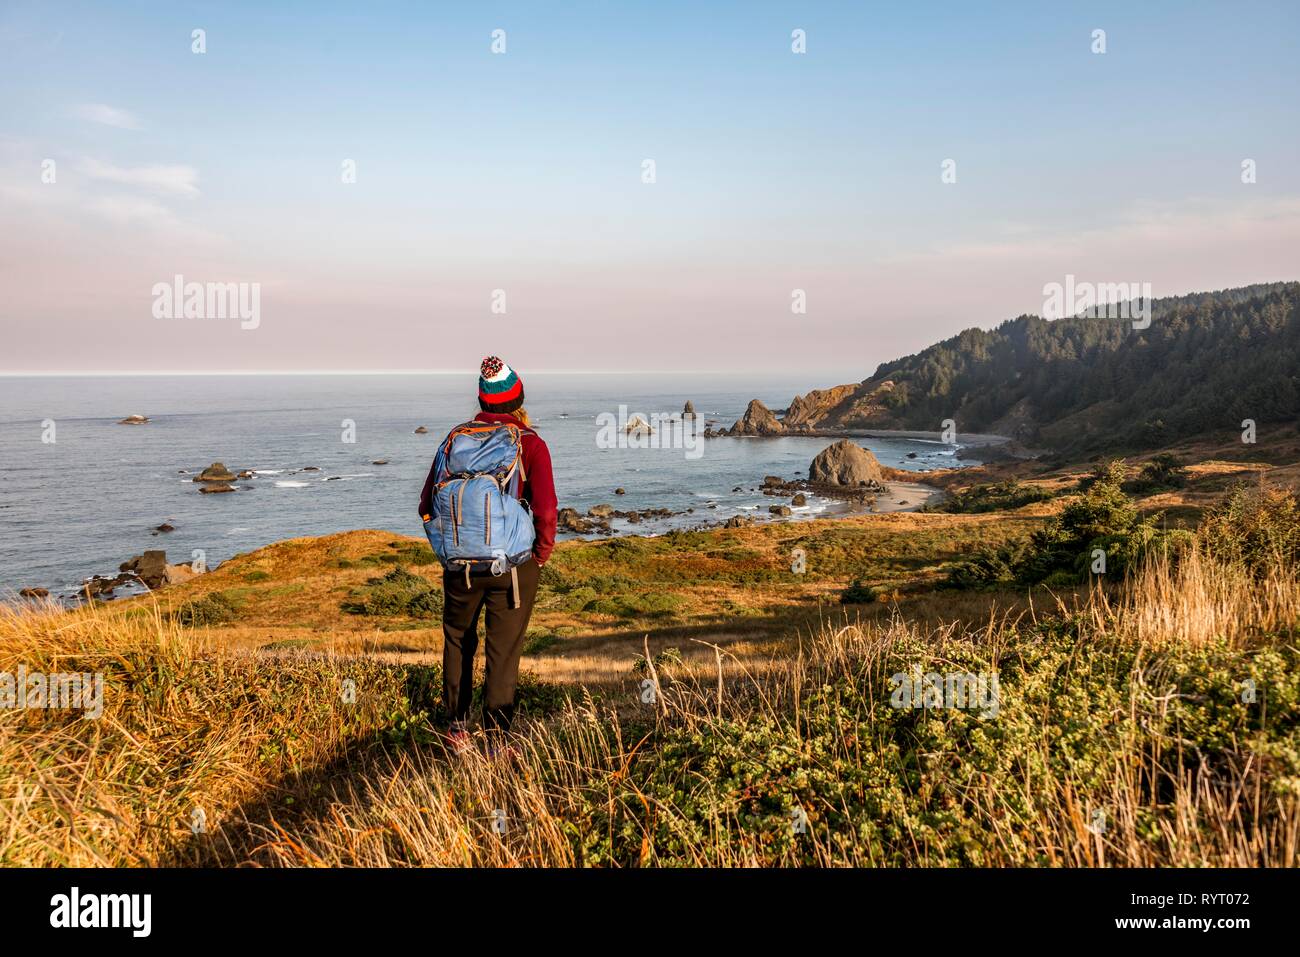 Young woman on a hiking trail along the rugged coast with many rocks, Whaleshead, Samuel H. Boardman State Scenic Corridor Stock Photo